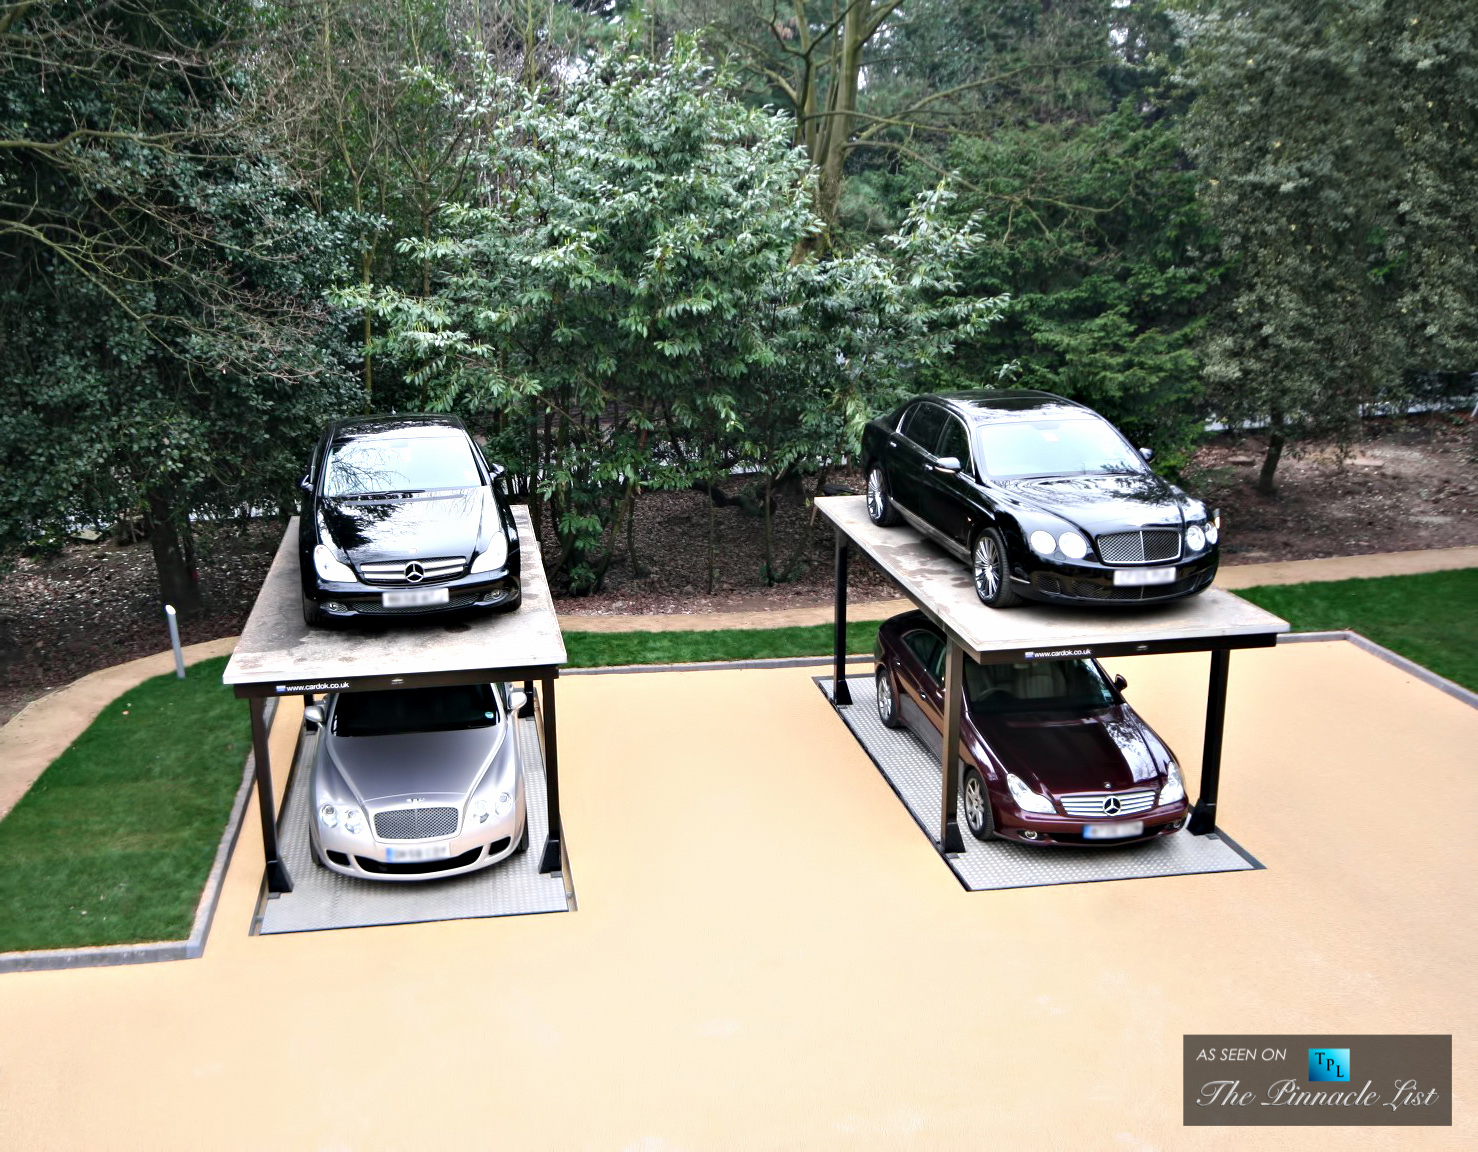 Cardok Underground Garage – The Ultimate Urban Solution for Secure Luxury Car Parking and Storage